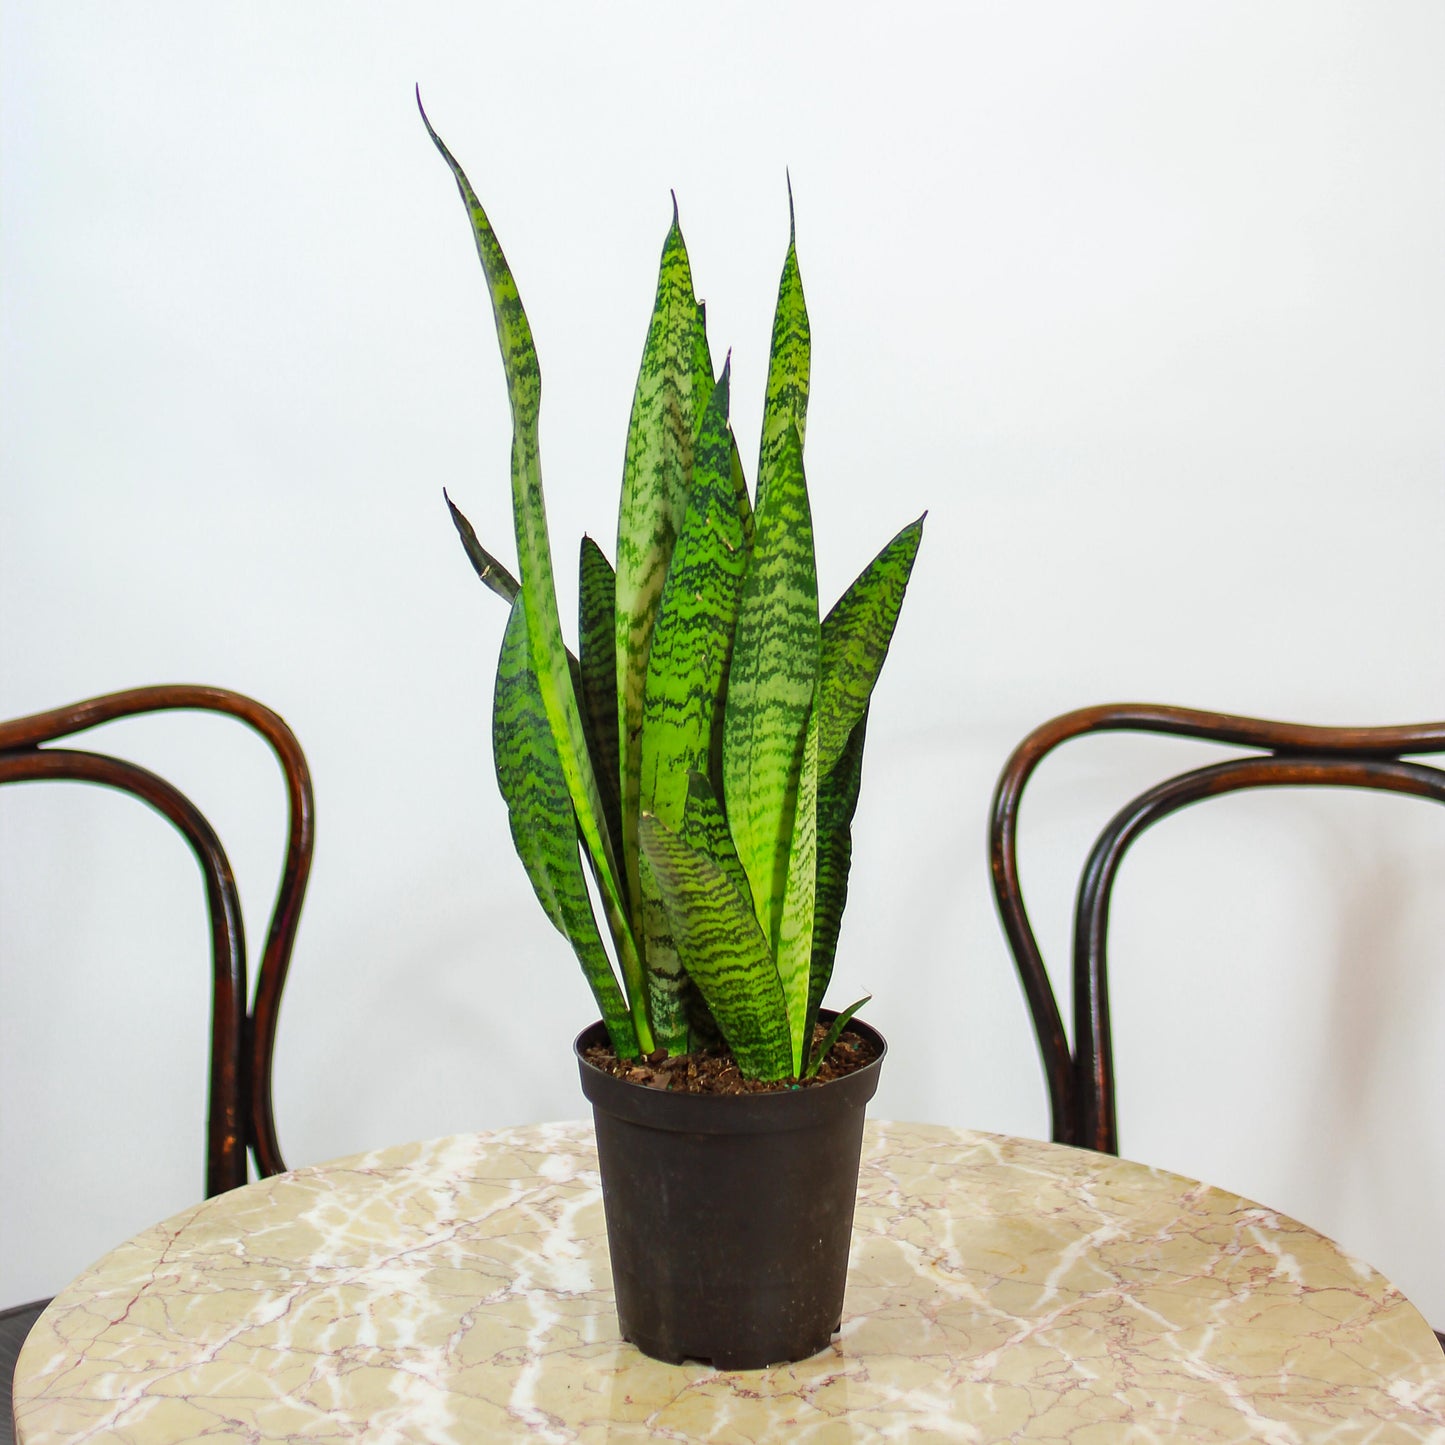 Premium Green Snake Plant (Sansevieria trifasciata) in a 6 inch pot. Indoor plant for sale by Promise Supply for delivery and pickup in Toronto